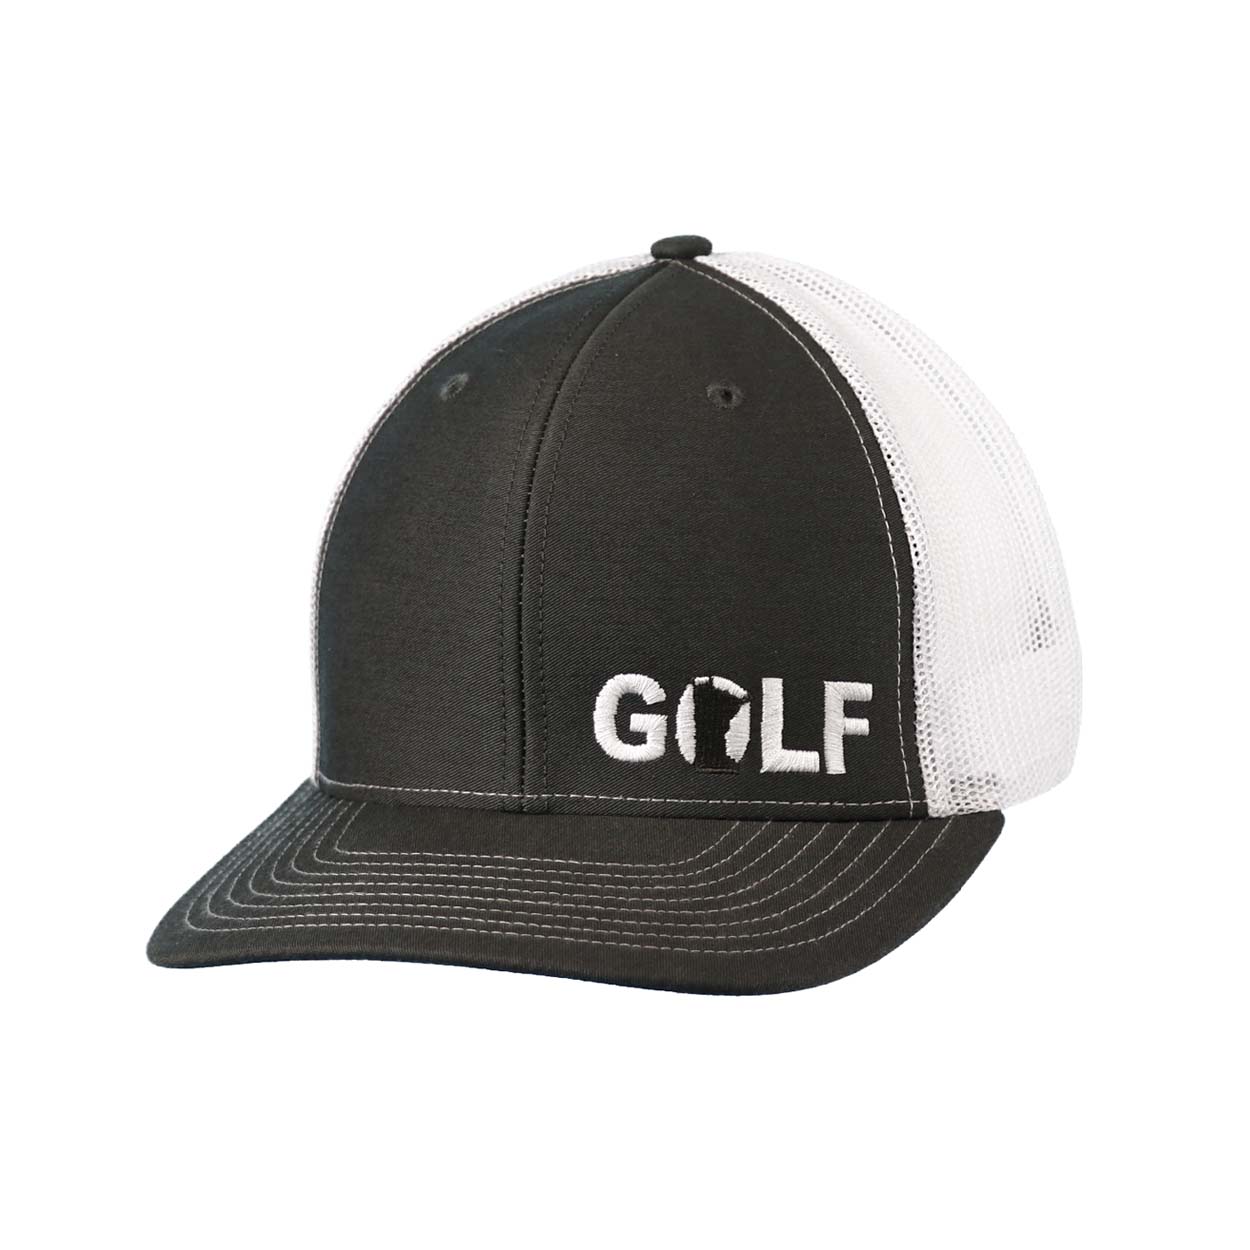 Golf Minnesota Night Out Embroidered Snapback Trucker Hat Charcoal/White